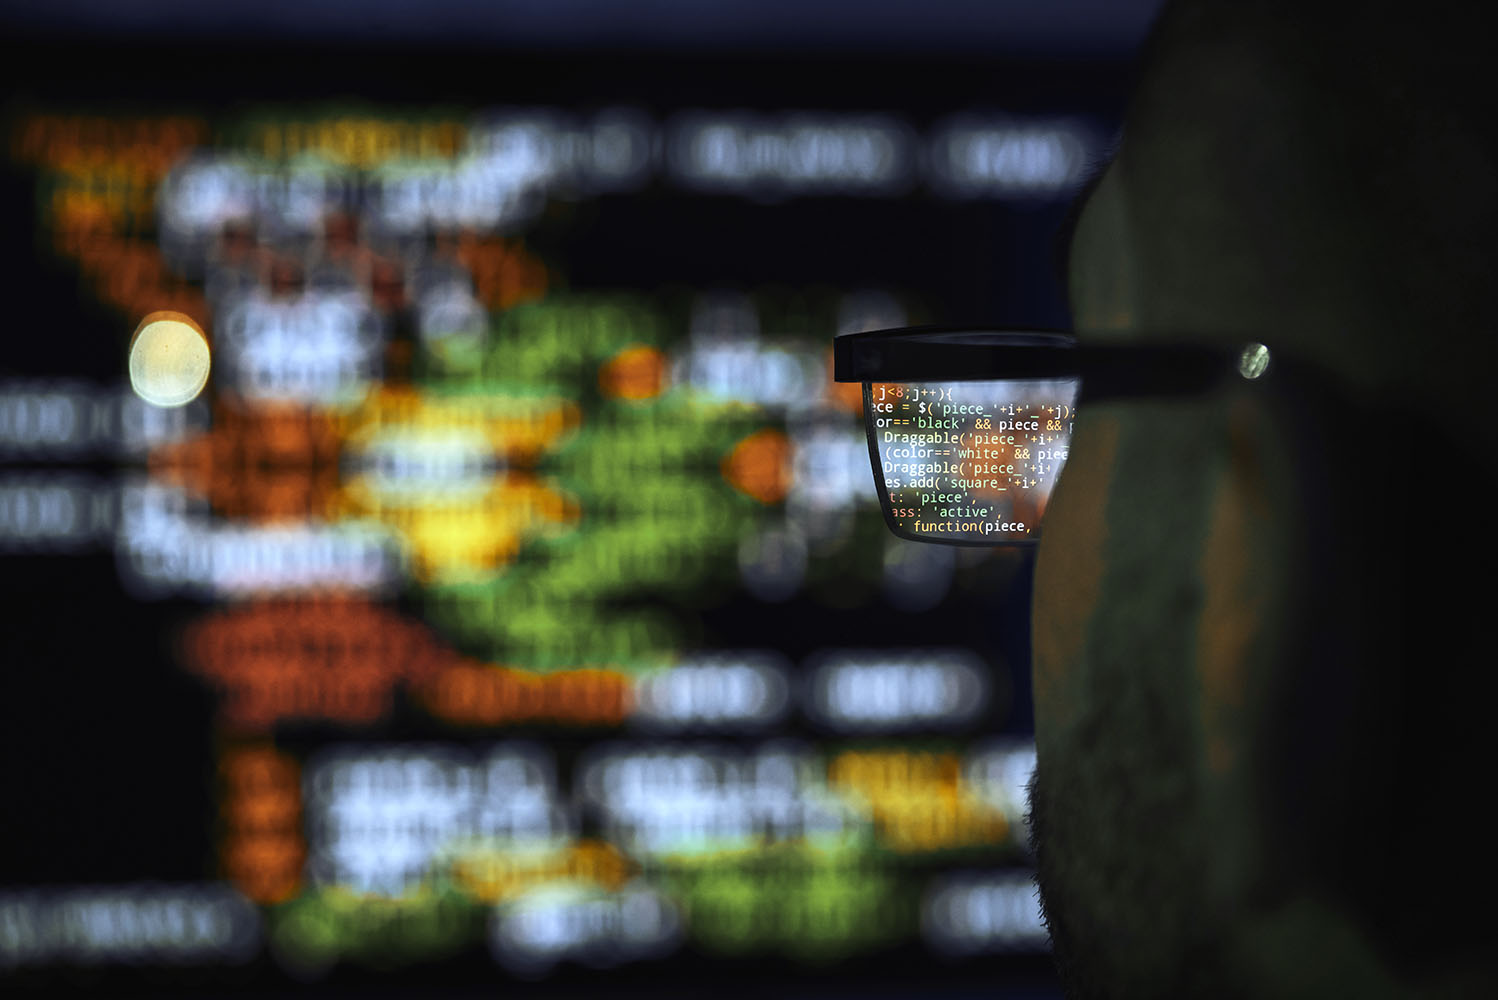 View through a man's glasses of code on a computer